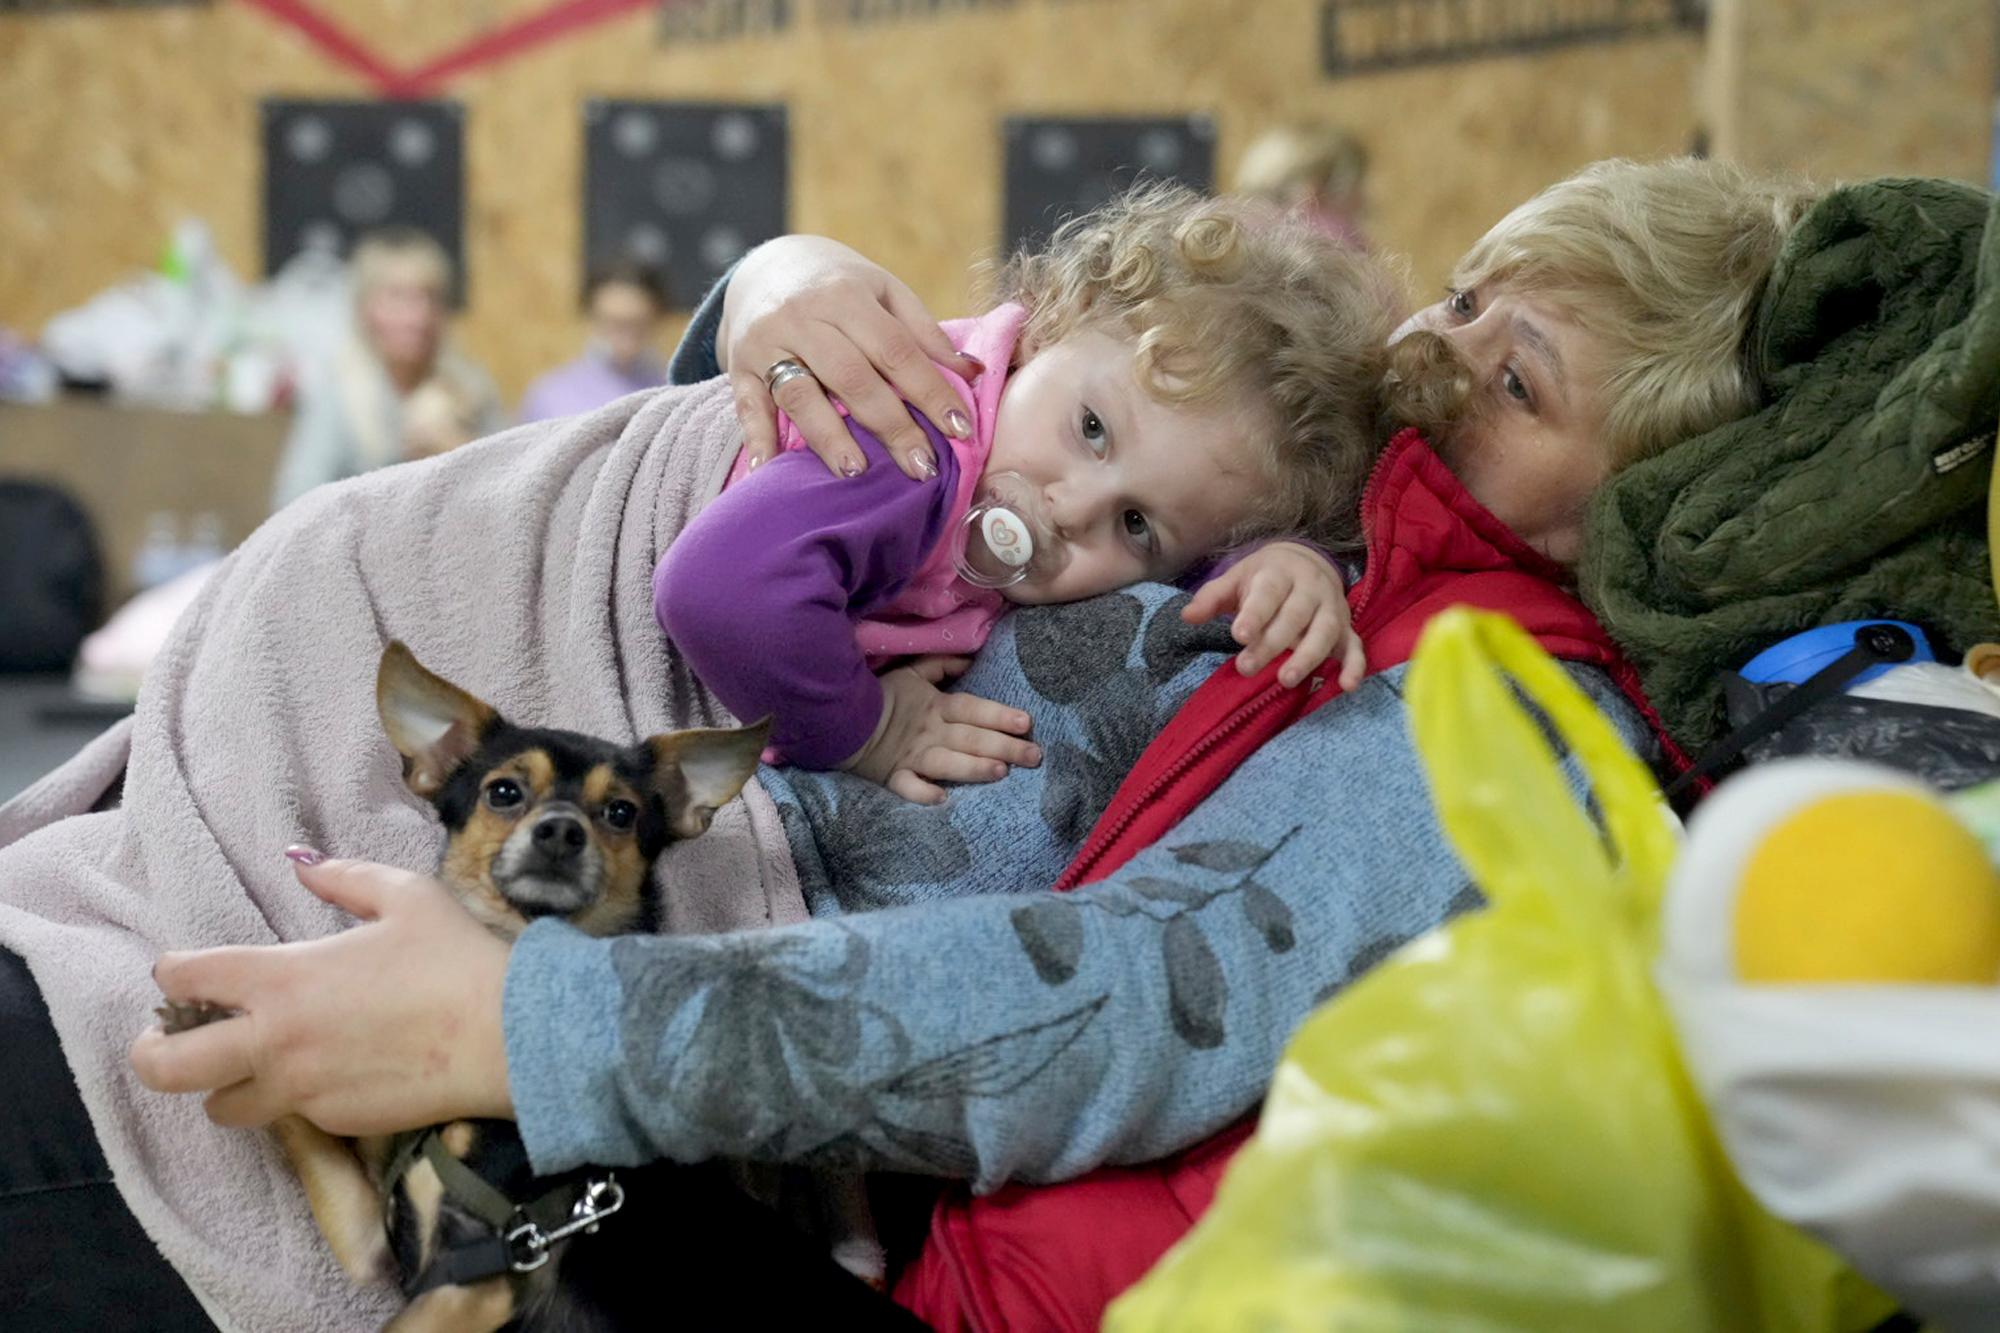 A women holds a child and a dog in a shelter inside a building in Mariupol, Ukraine, Feb. 27, 2022. Street fighting broke out in Ukraine's second-largest city and Russian troops squeezed strategic ports in the country's south as the prospect of peace talks remains uncertain. Pic/PTI